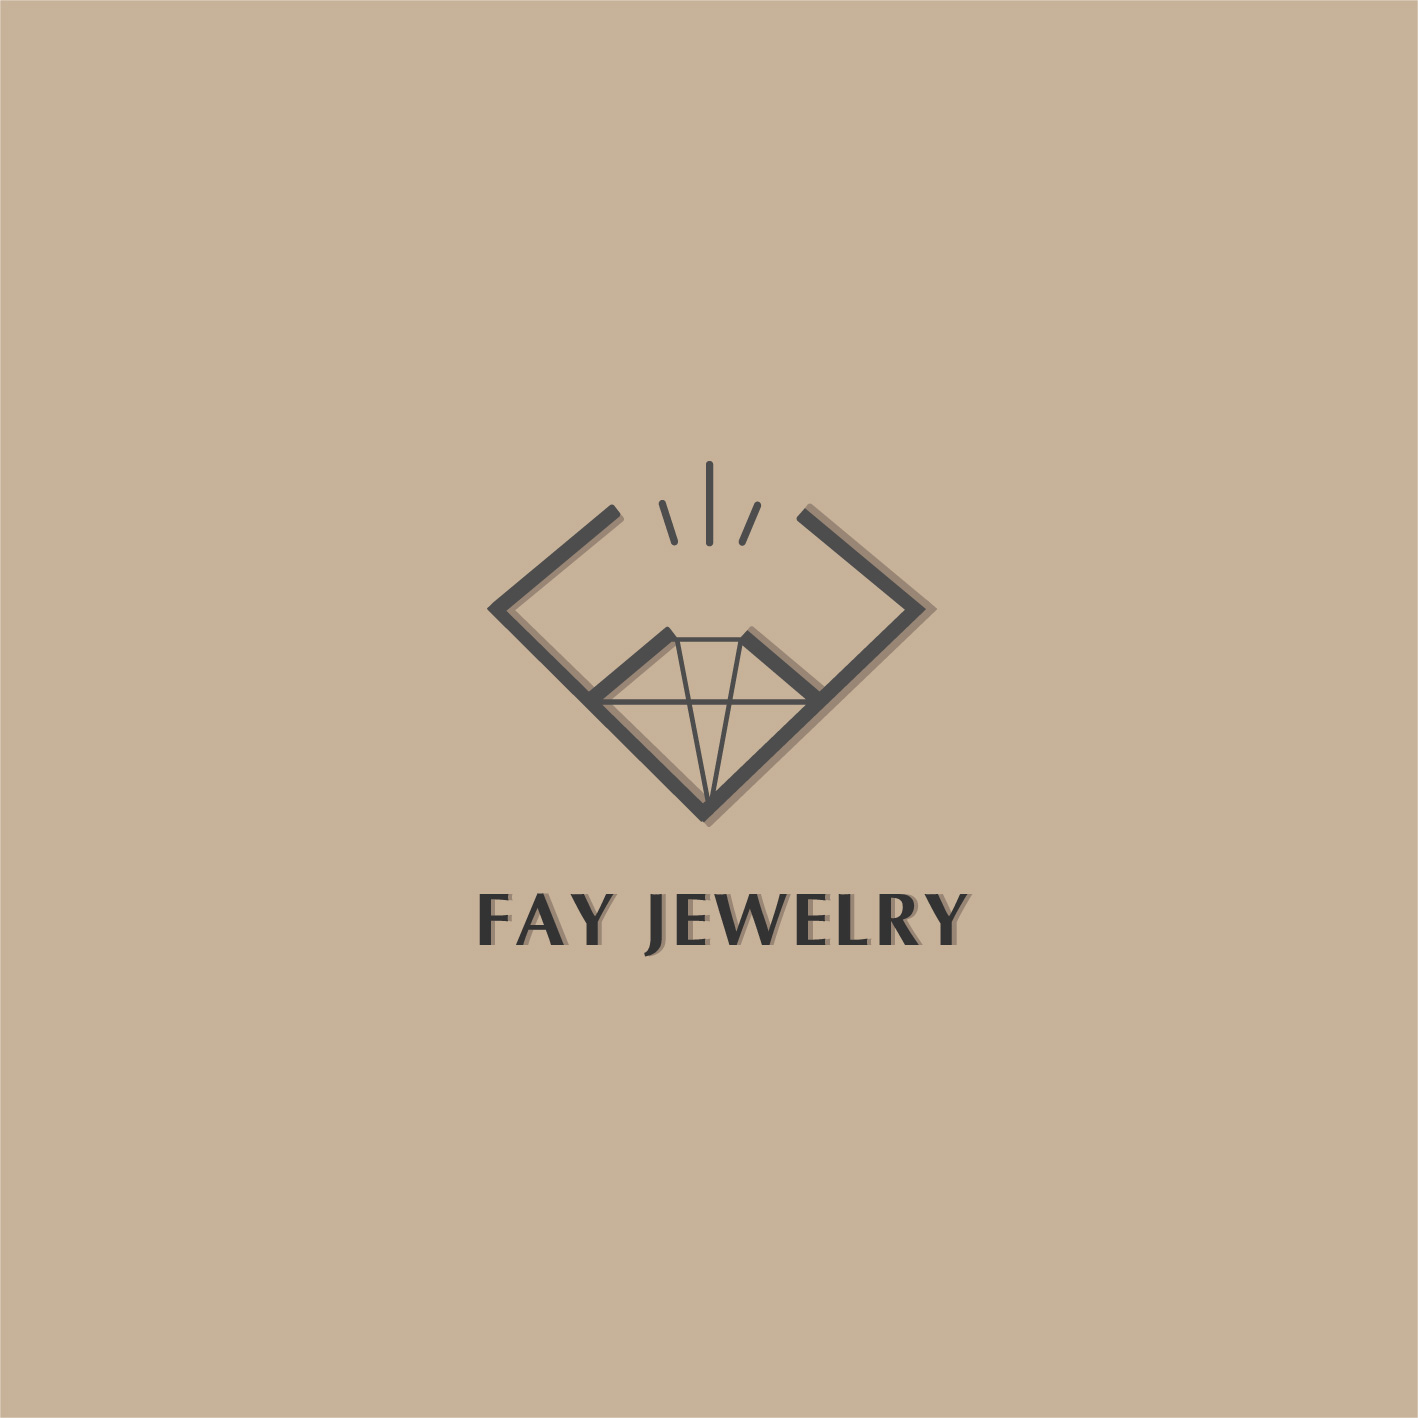 How to Beef Up Jewelry Store Branding